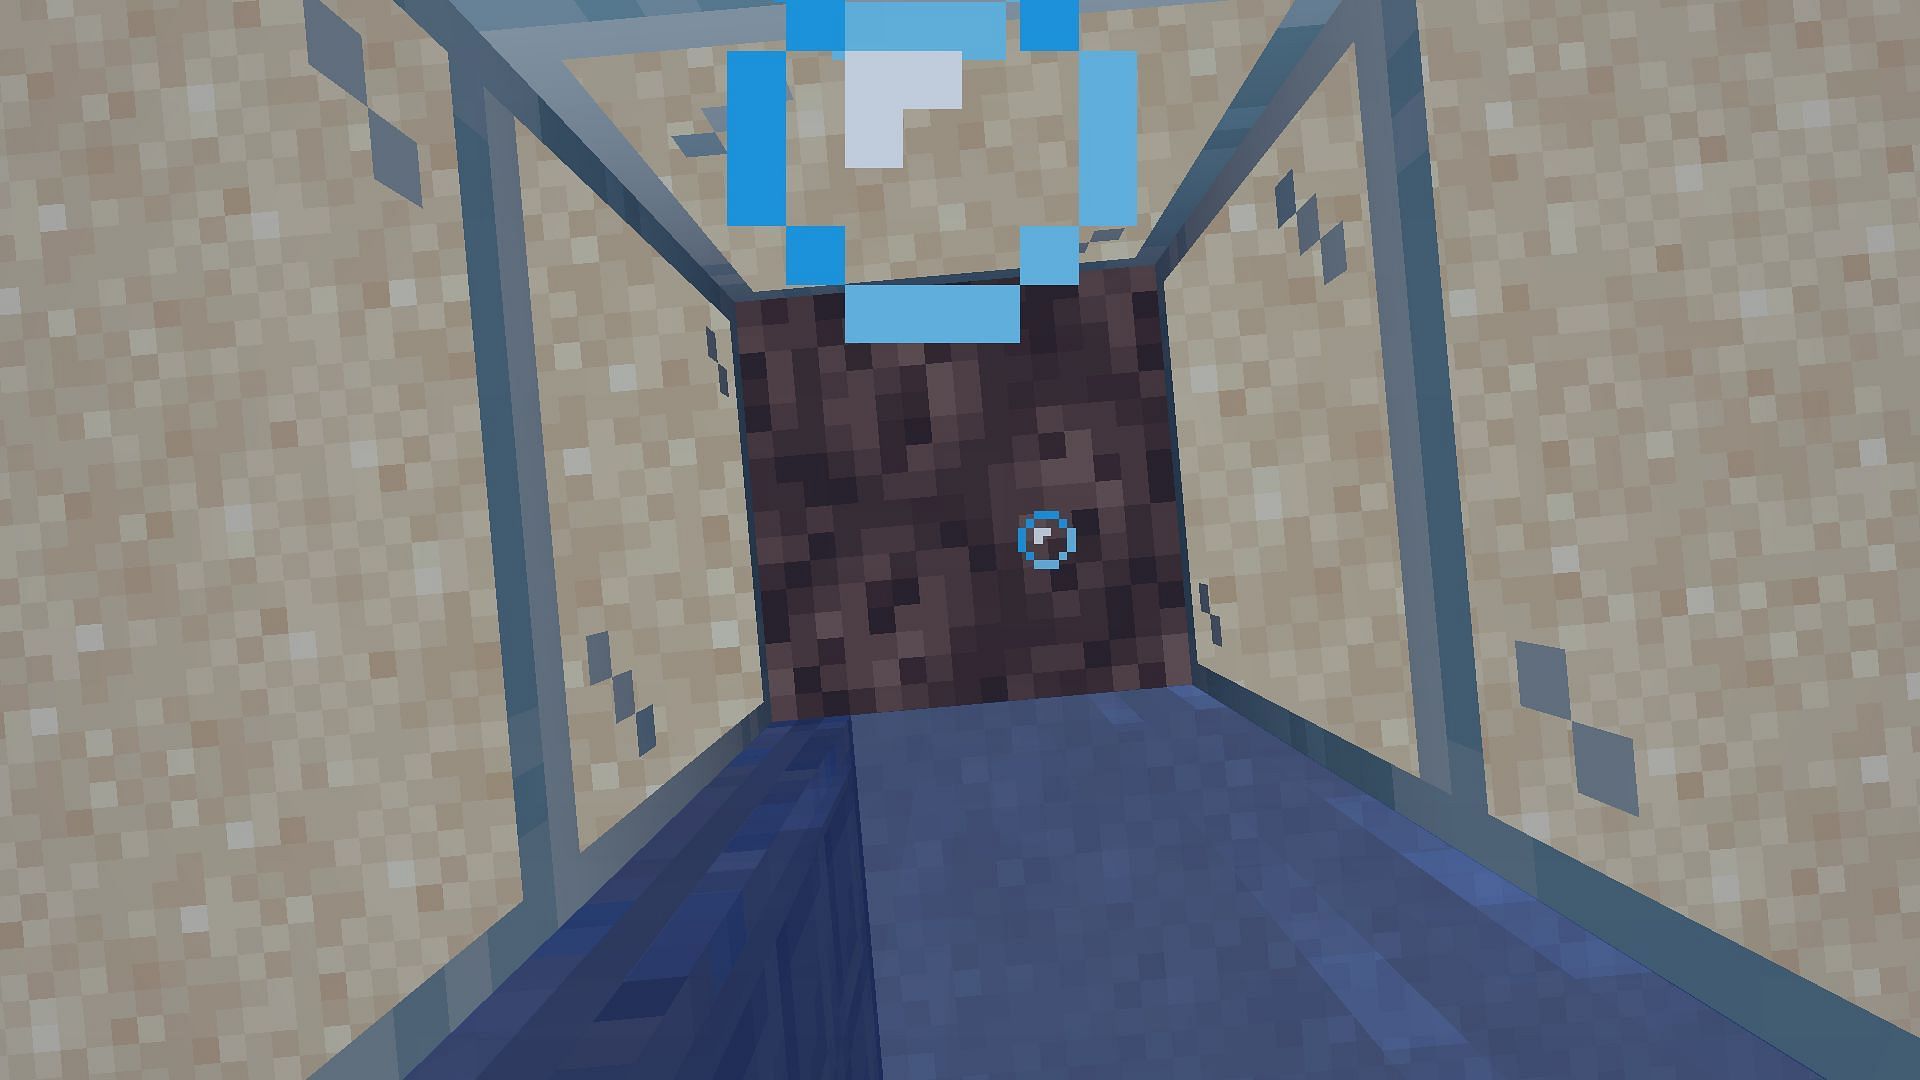 Bubbles will be visible in the water, indicating the upward flow (Image via Minecraft)